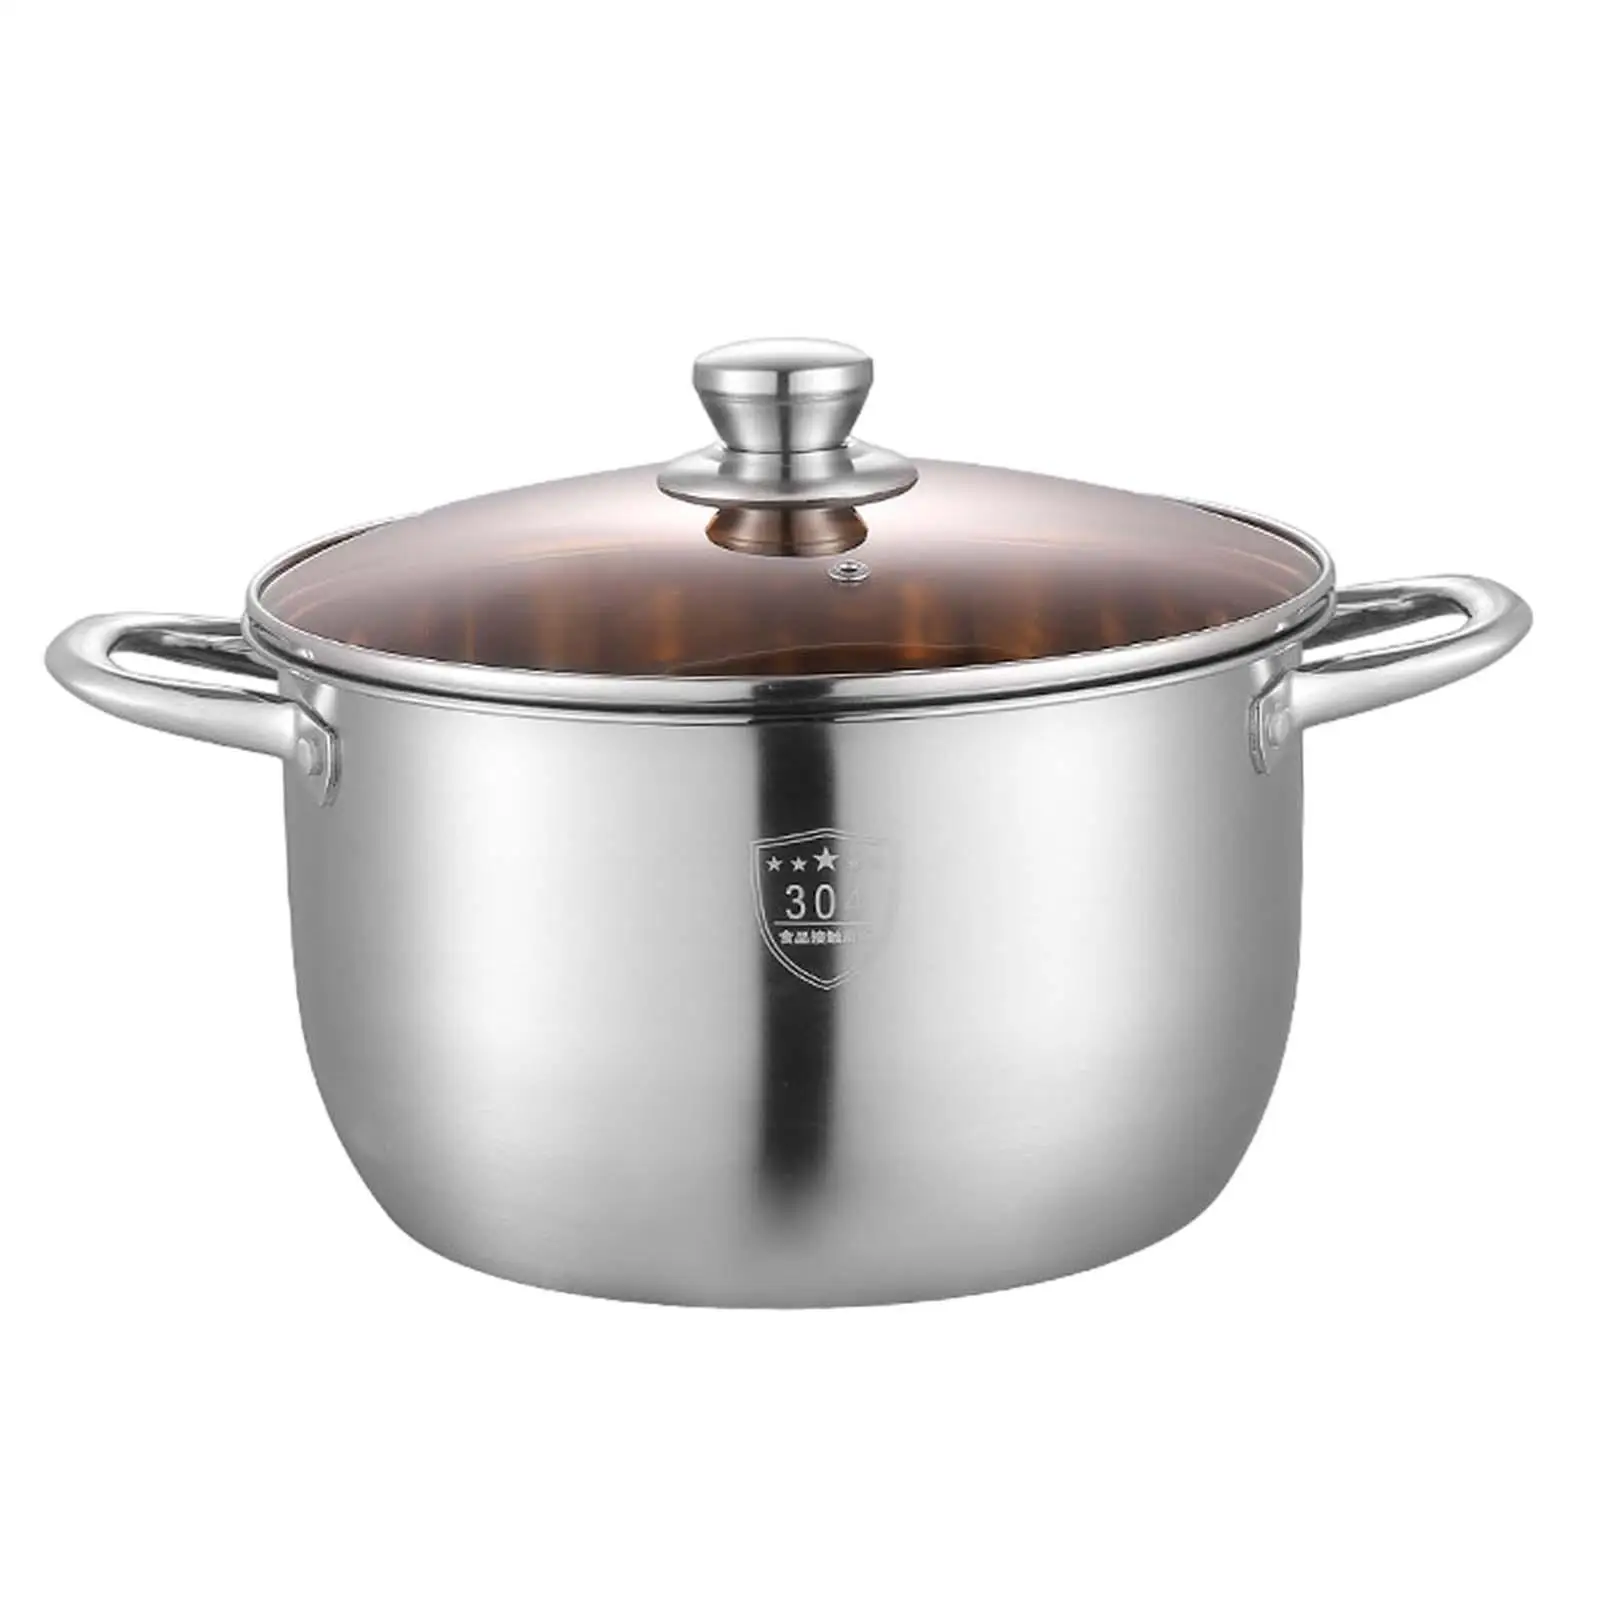 Stainless Steel Stockpot Dual Handle Perfect Size Easy to Clean Non Stick Soup Pot for Vegetables Eggs Warming Milk Soup Sauce